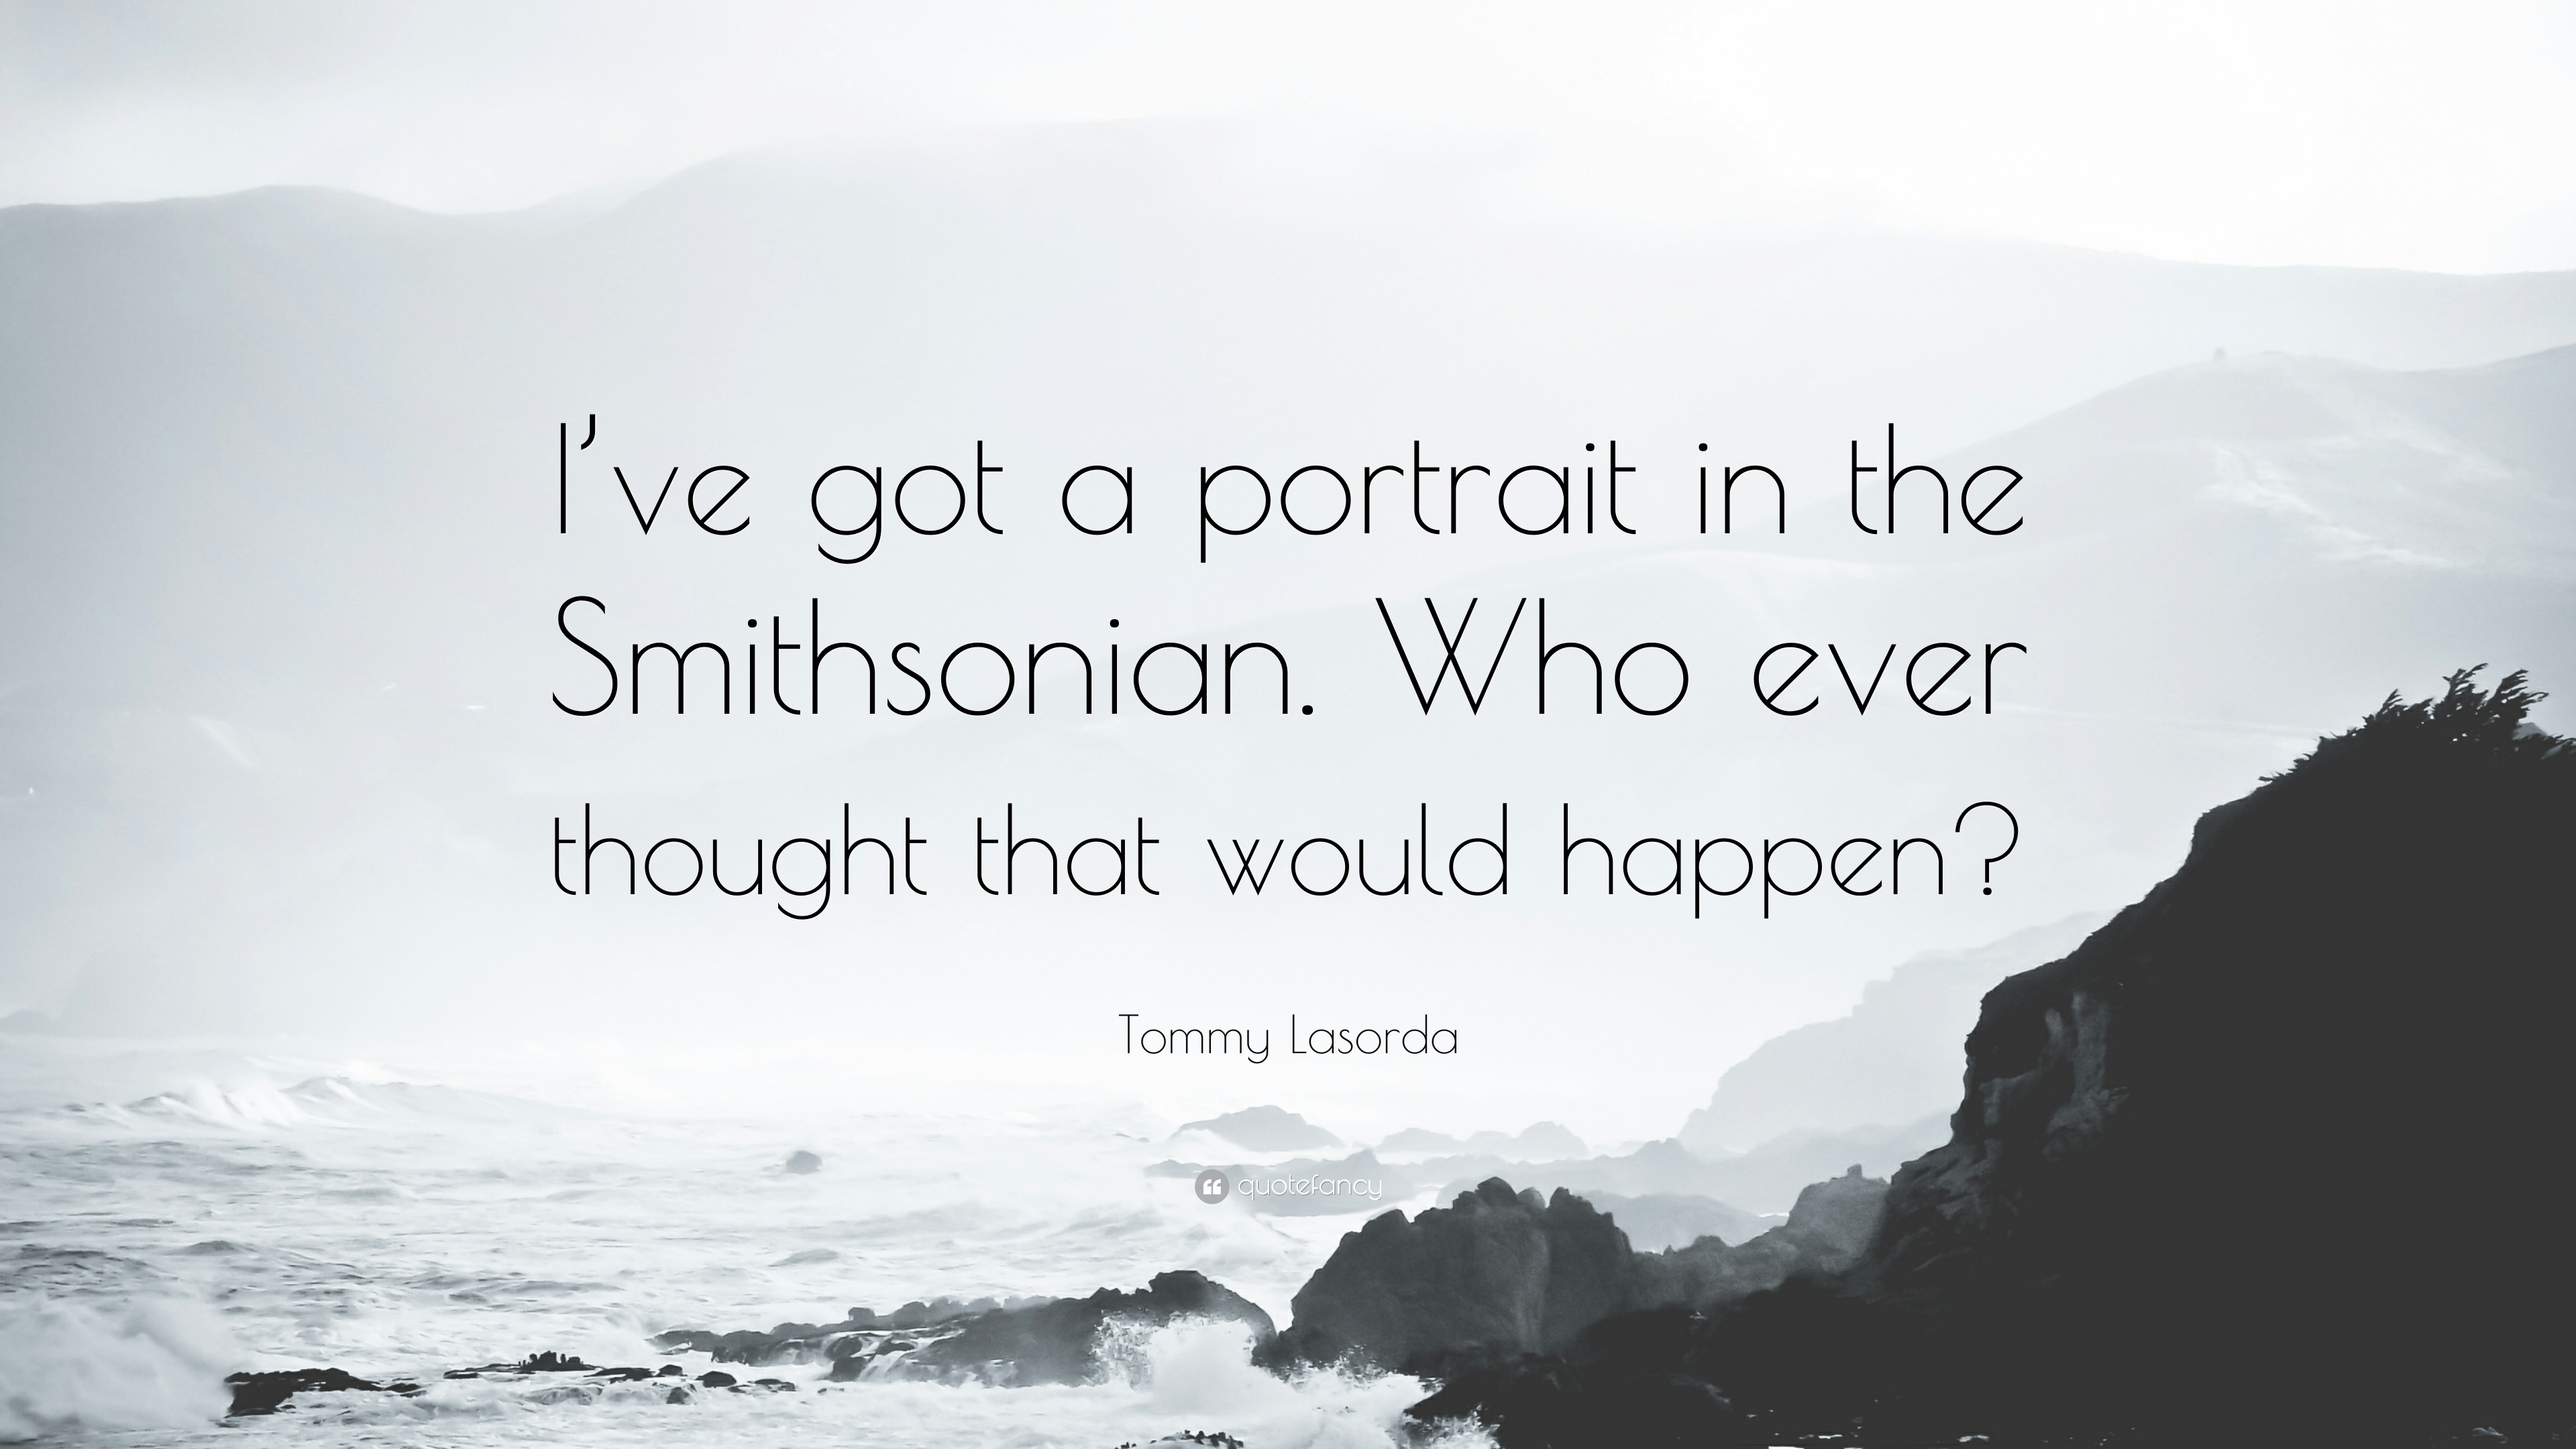 Tommy Lasorda Quote: “I've got a portrait in the Smithsonian. Who